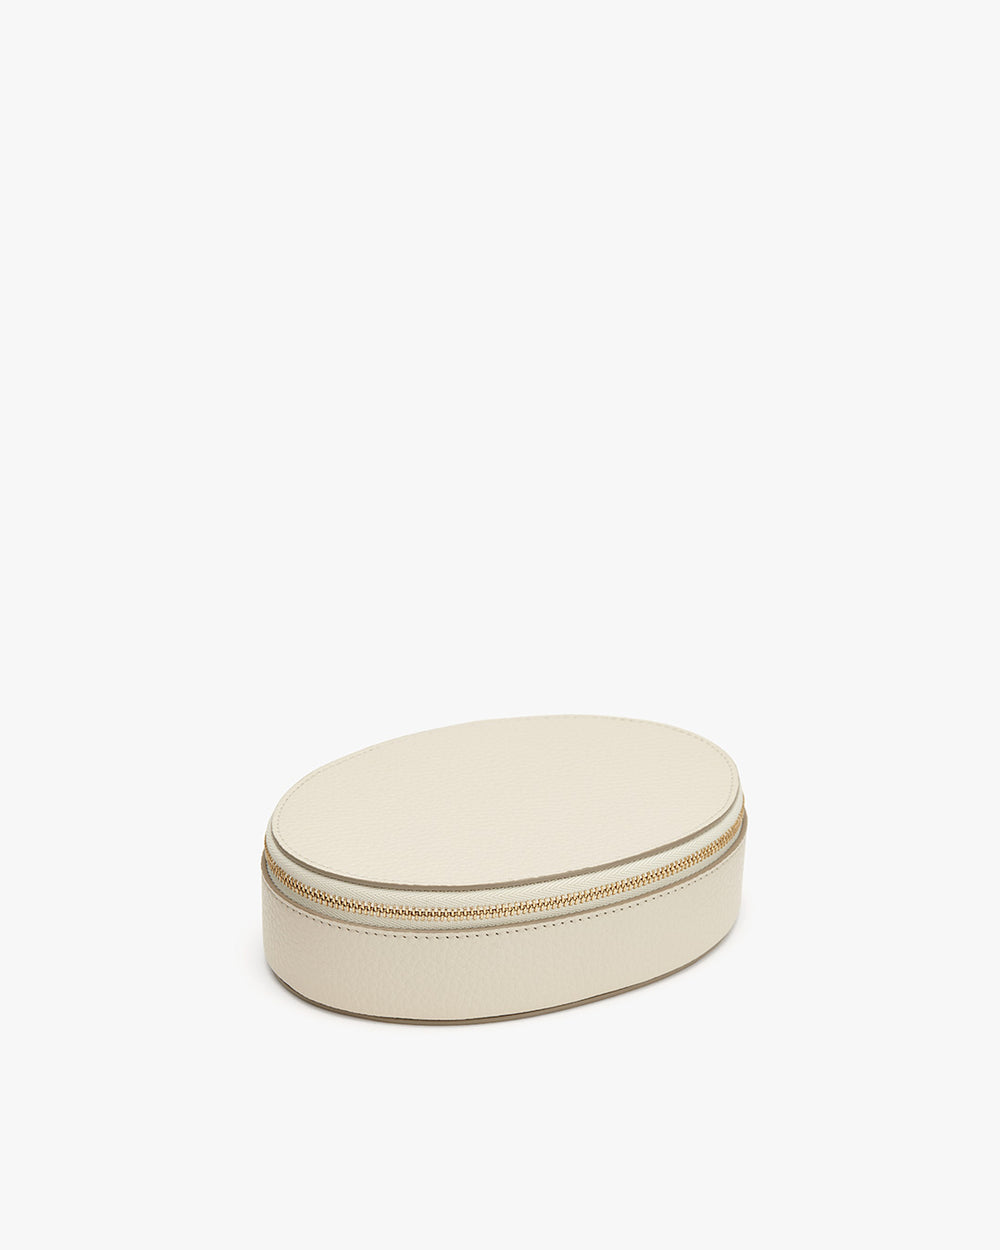 Oval-shaped zippered case on a plain background.